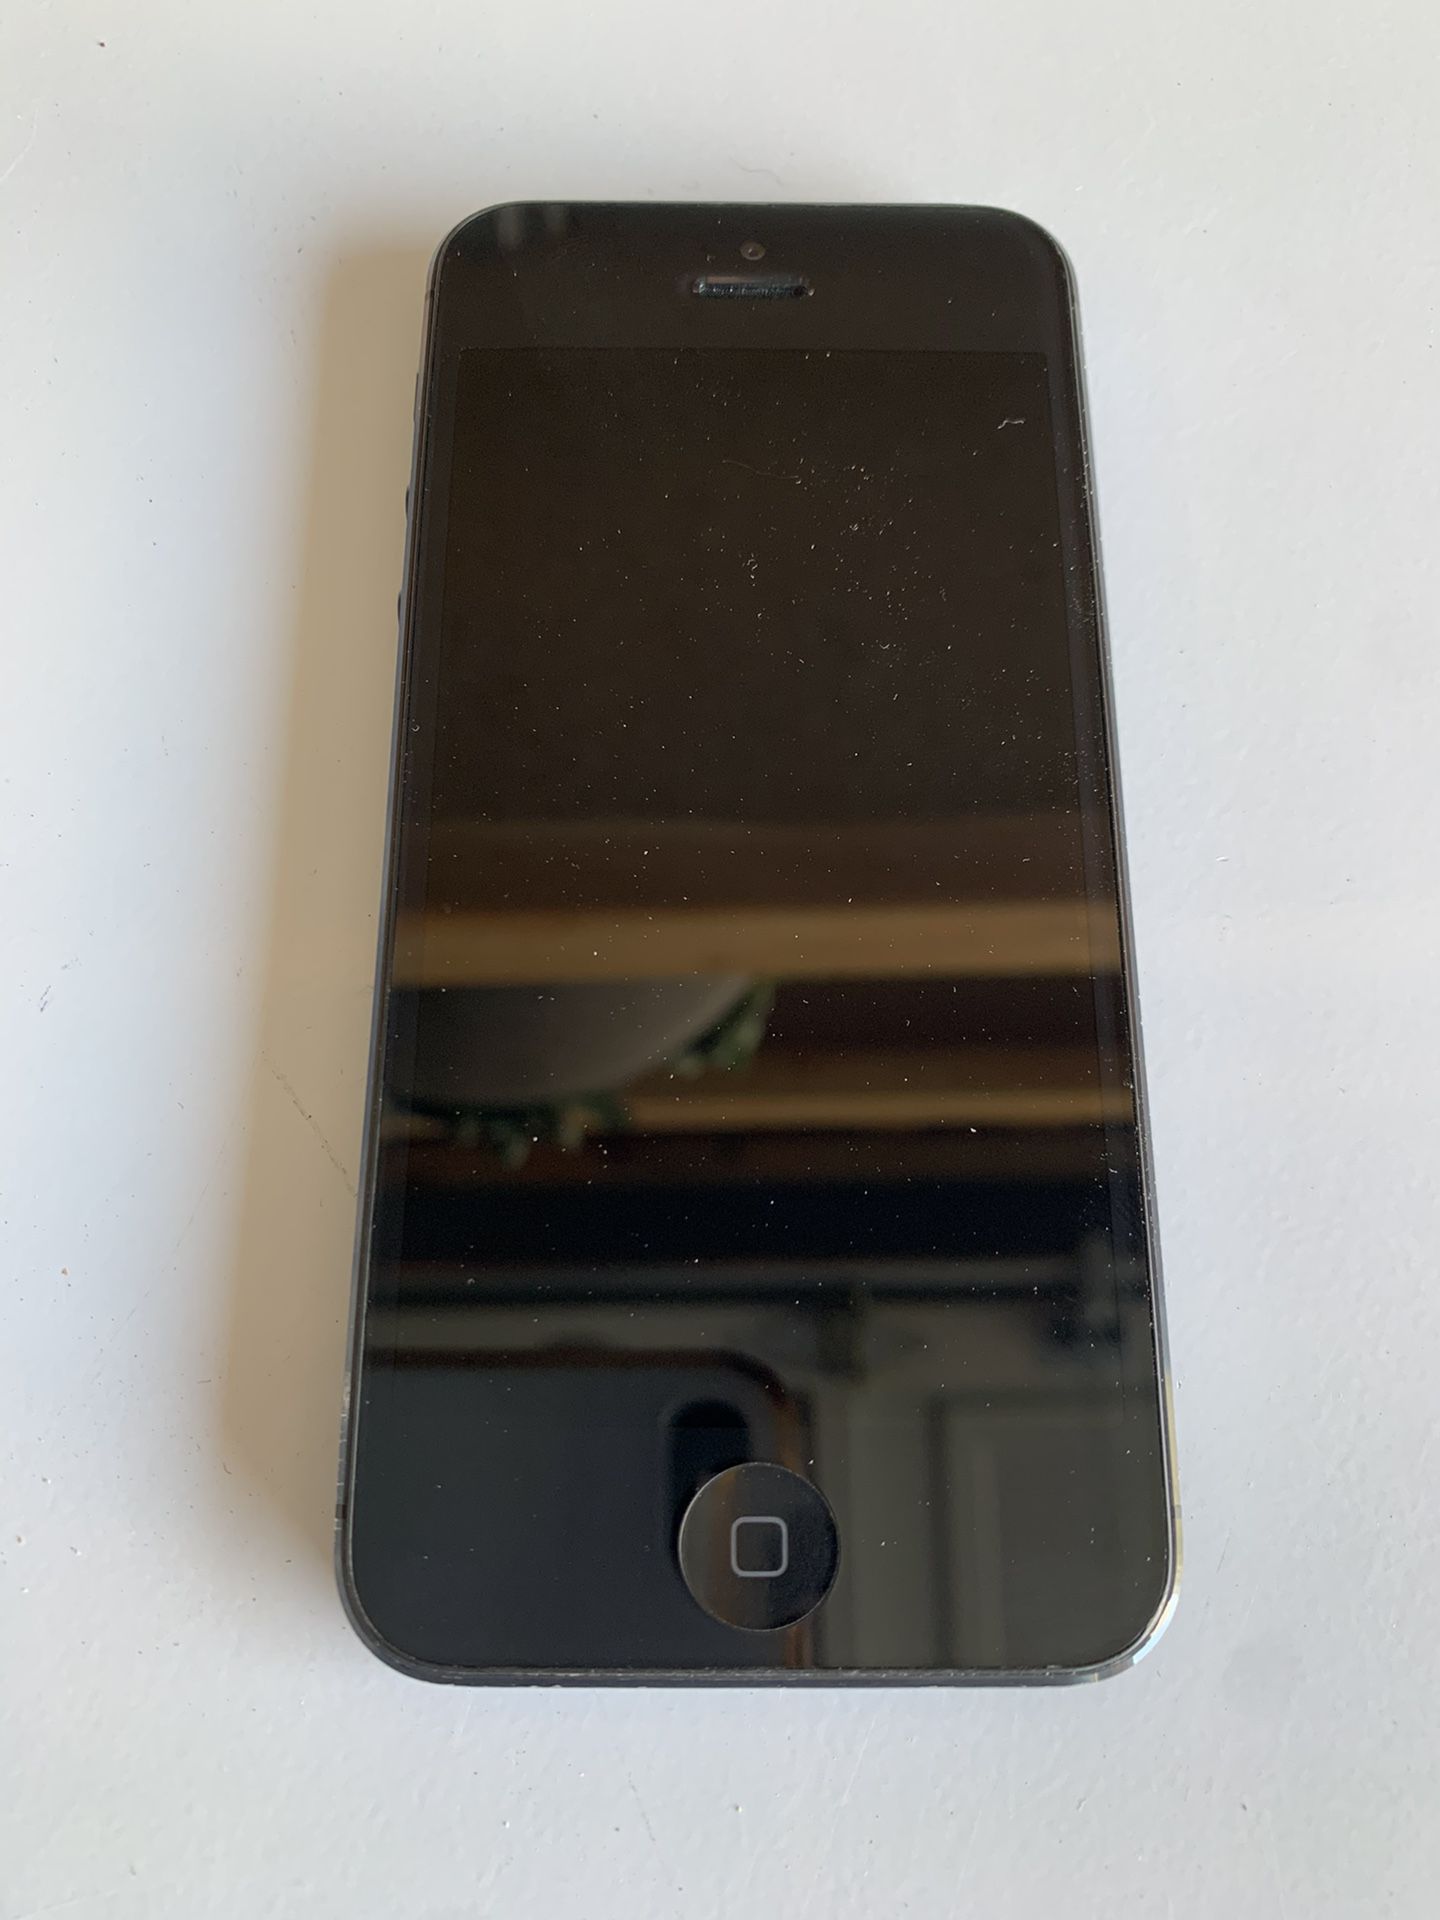 iPhone 5 / Model: A1429 / Black / 16GB / Sprint / RESET TO FACTORY SETTINGS